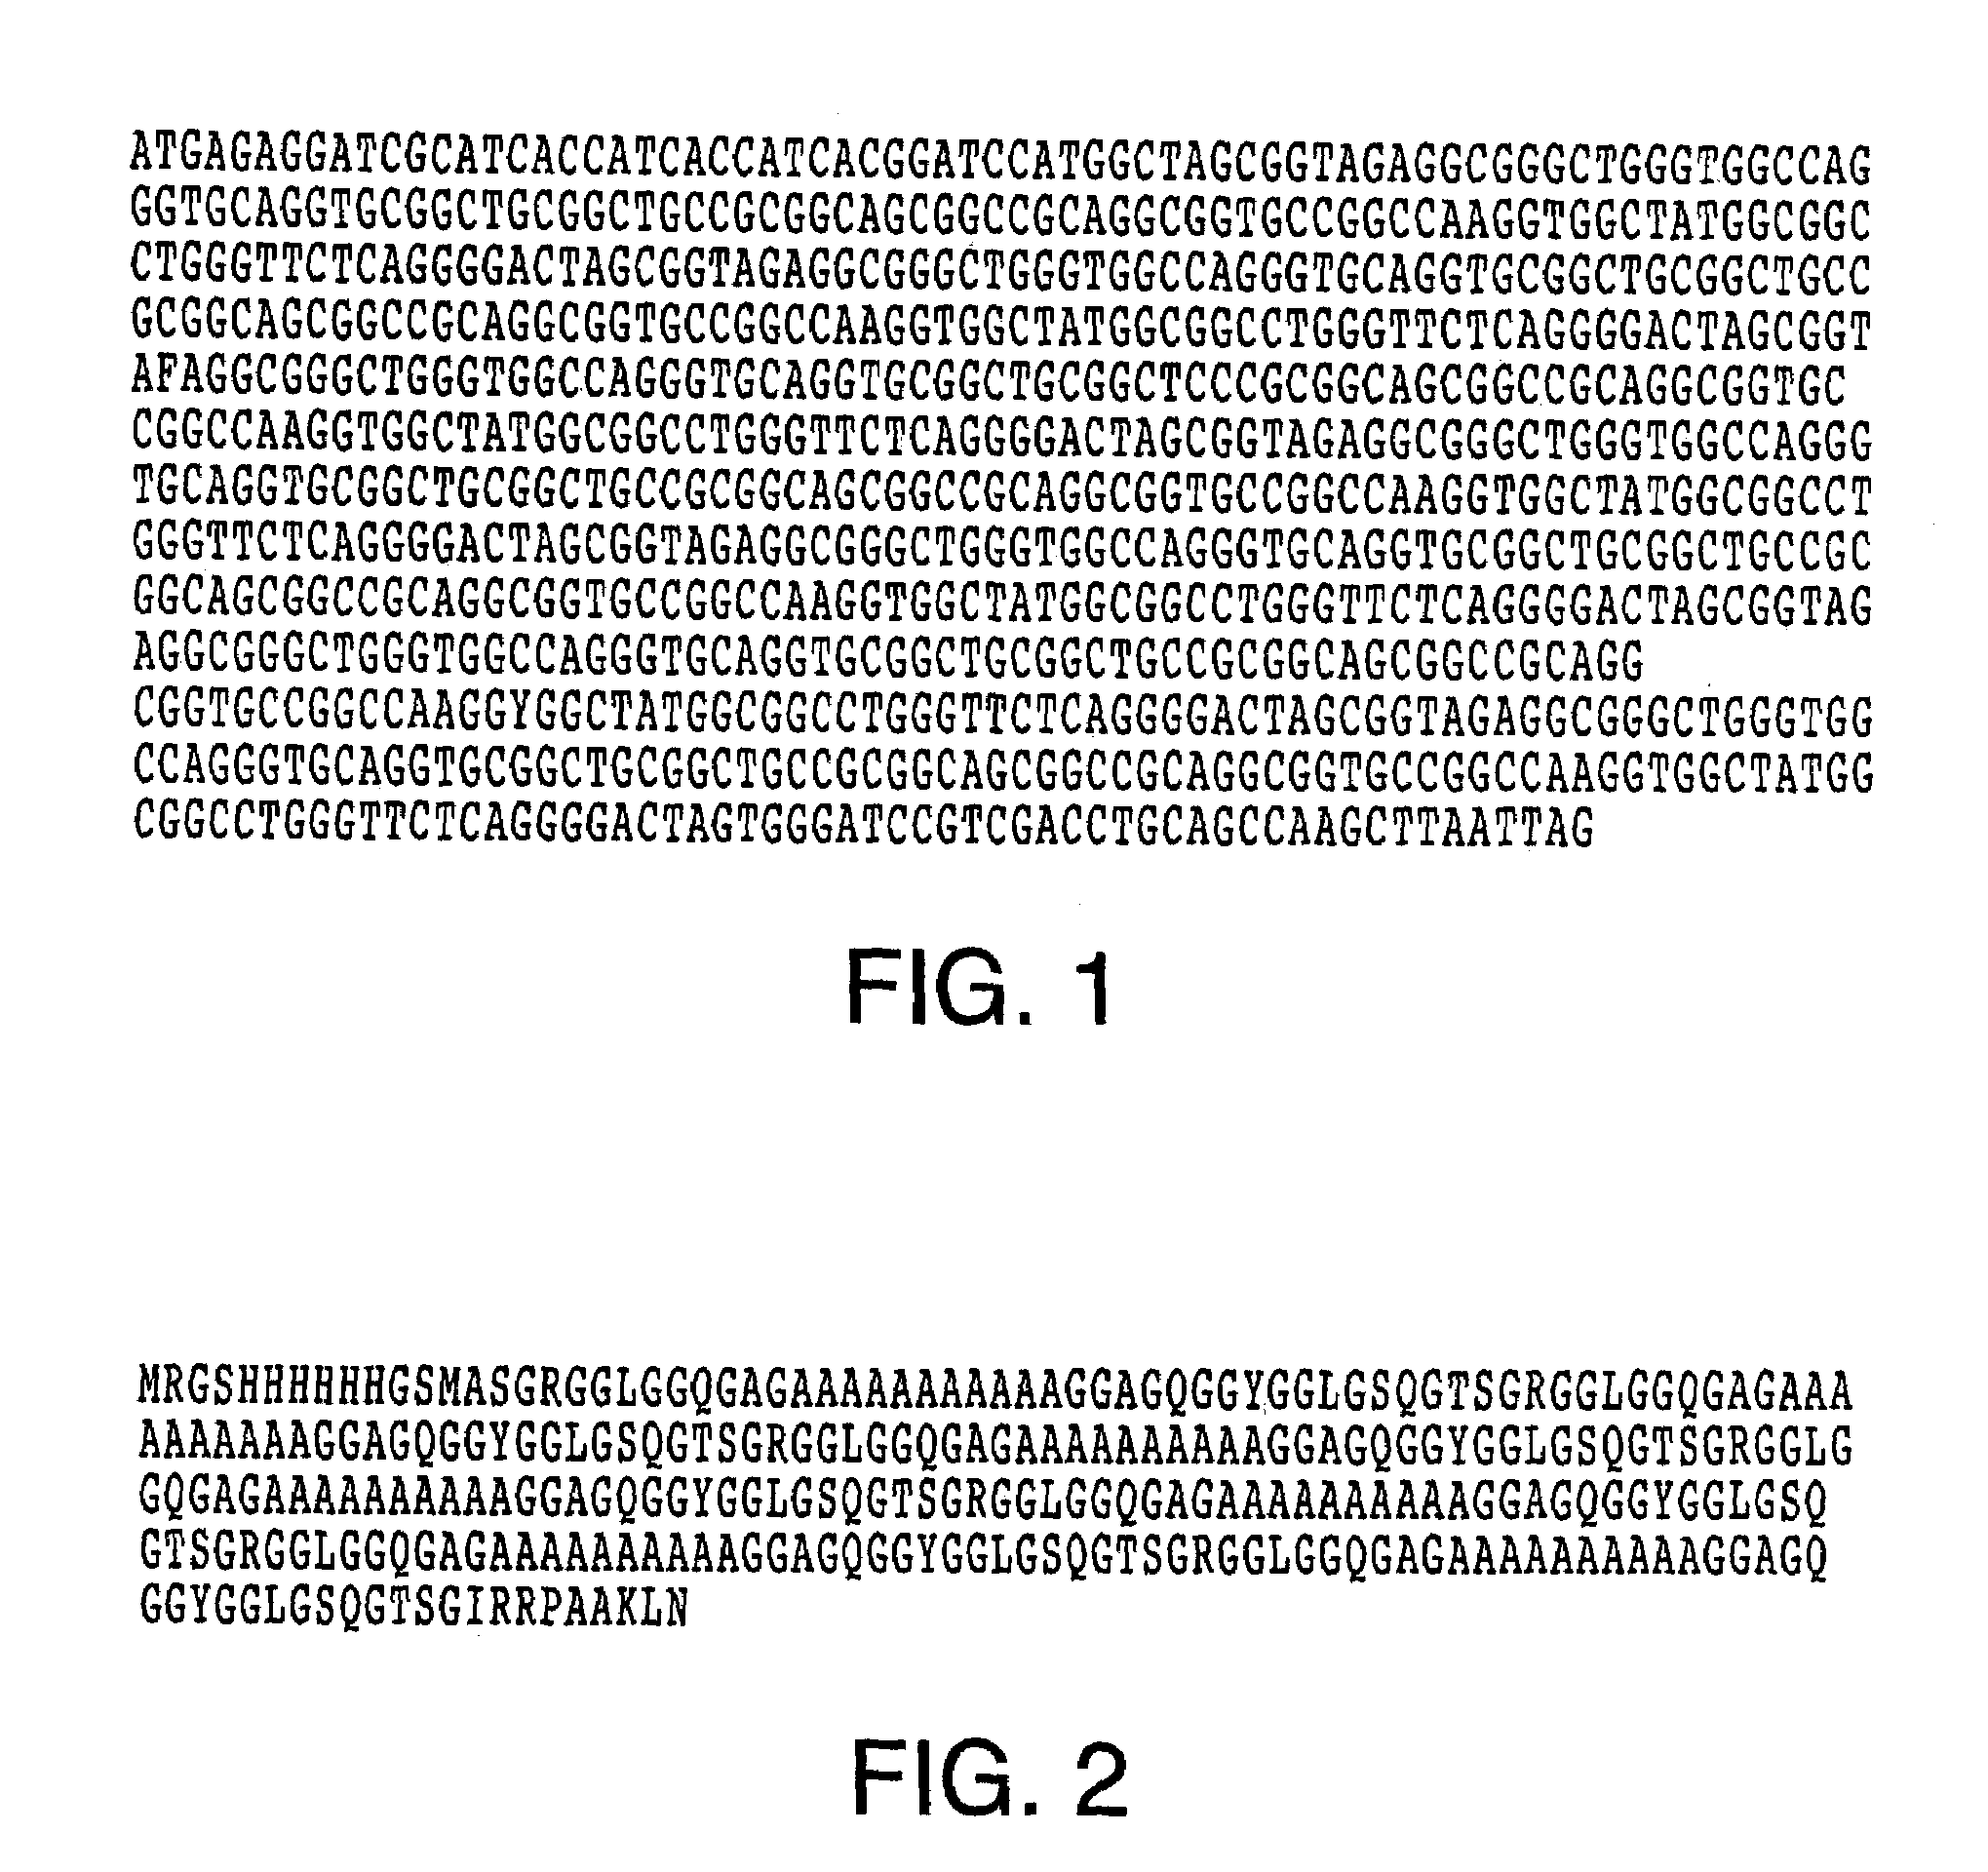 Methods for the purification and aqueous fiber spinning of spider silks and other structural proteins